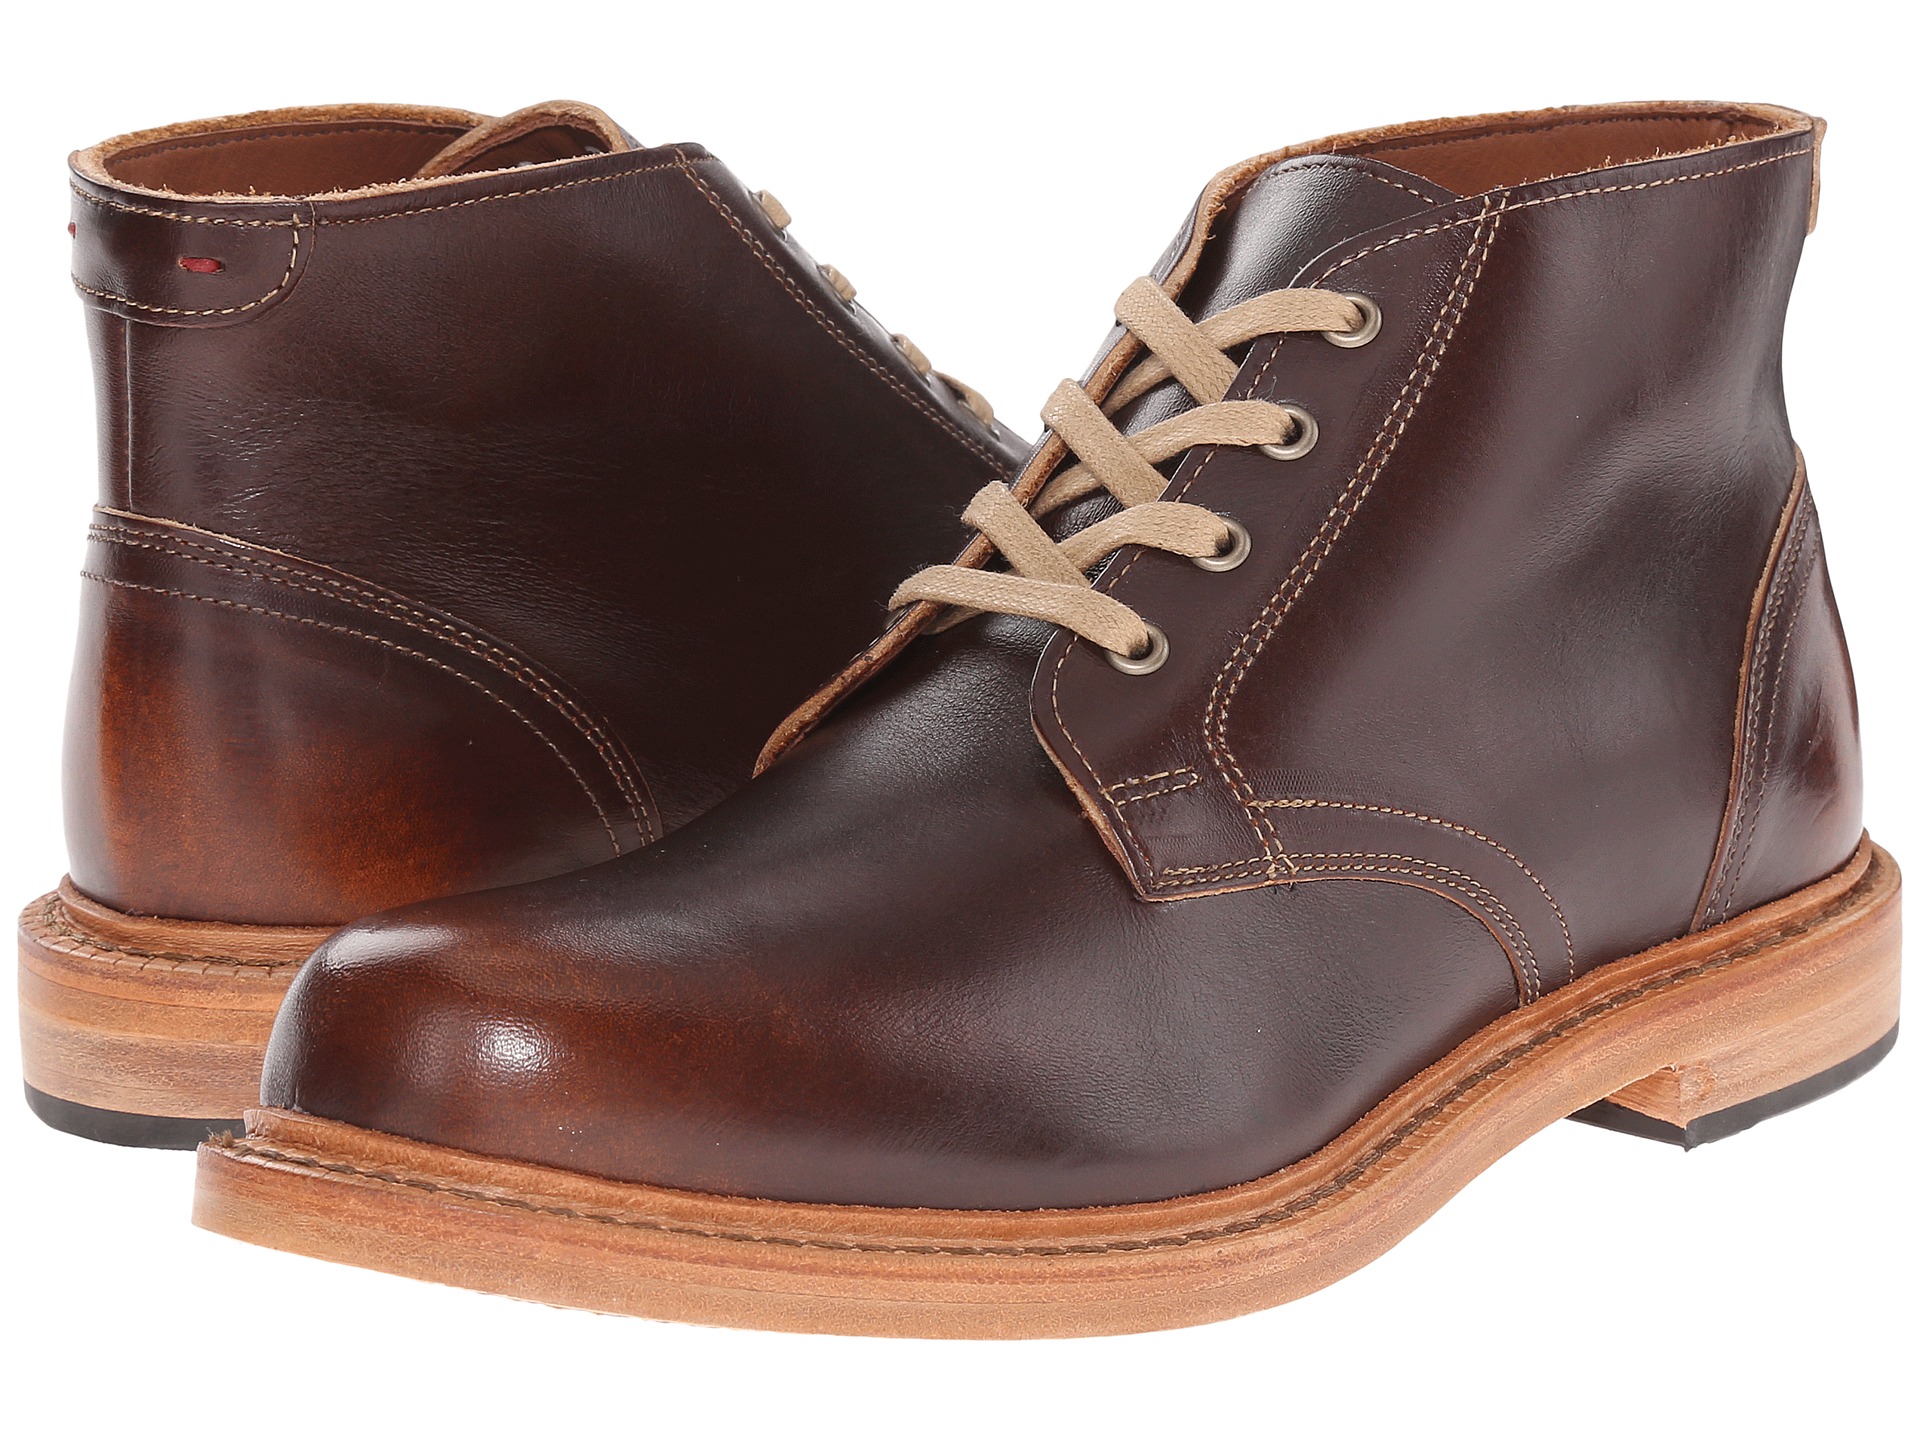 Allen-Edmonds Odenwald Brown Leather - Zappos.com Free Shipping BOTH Ways